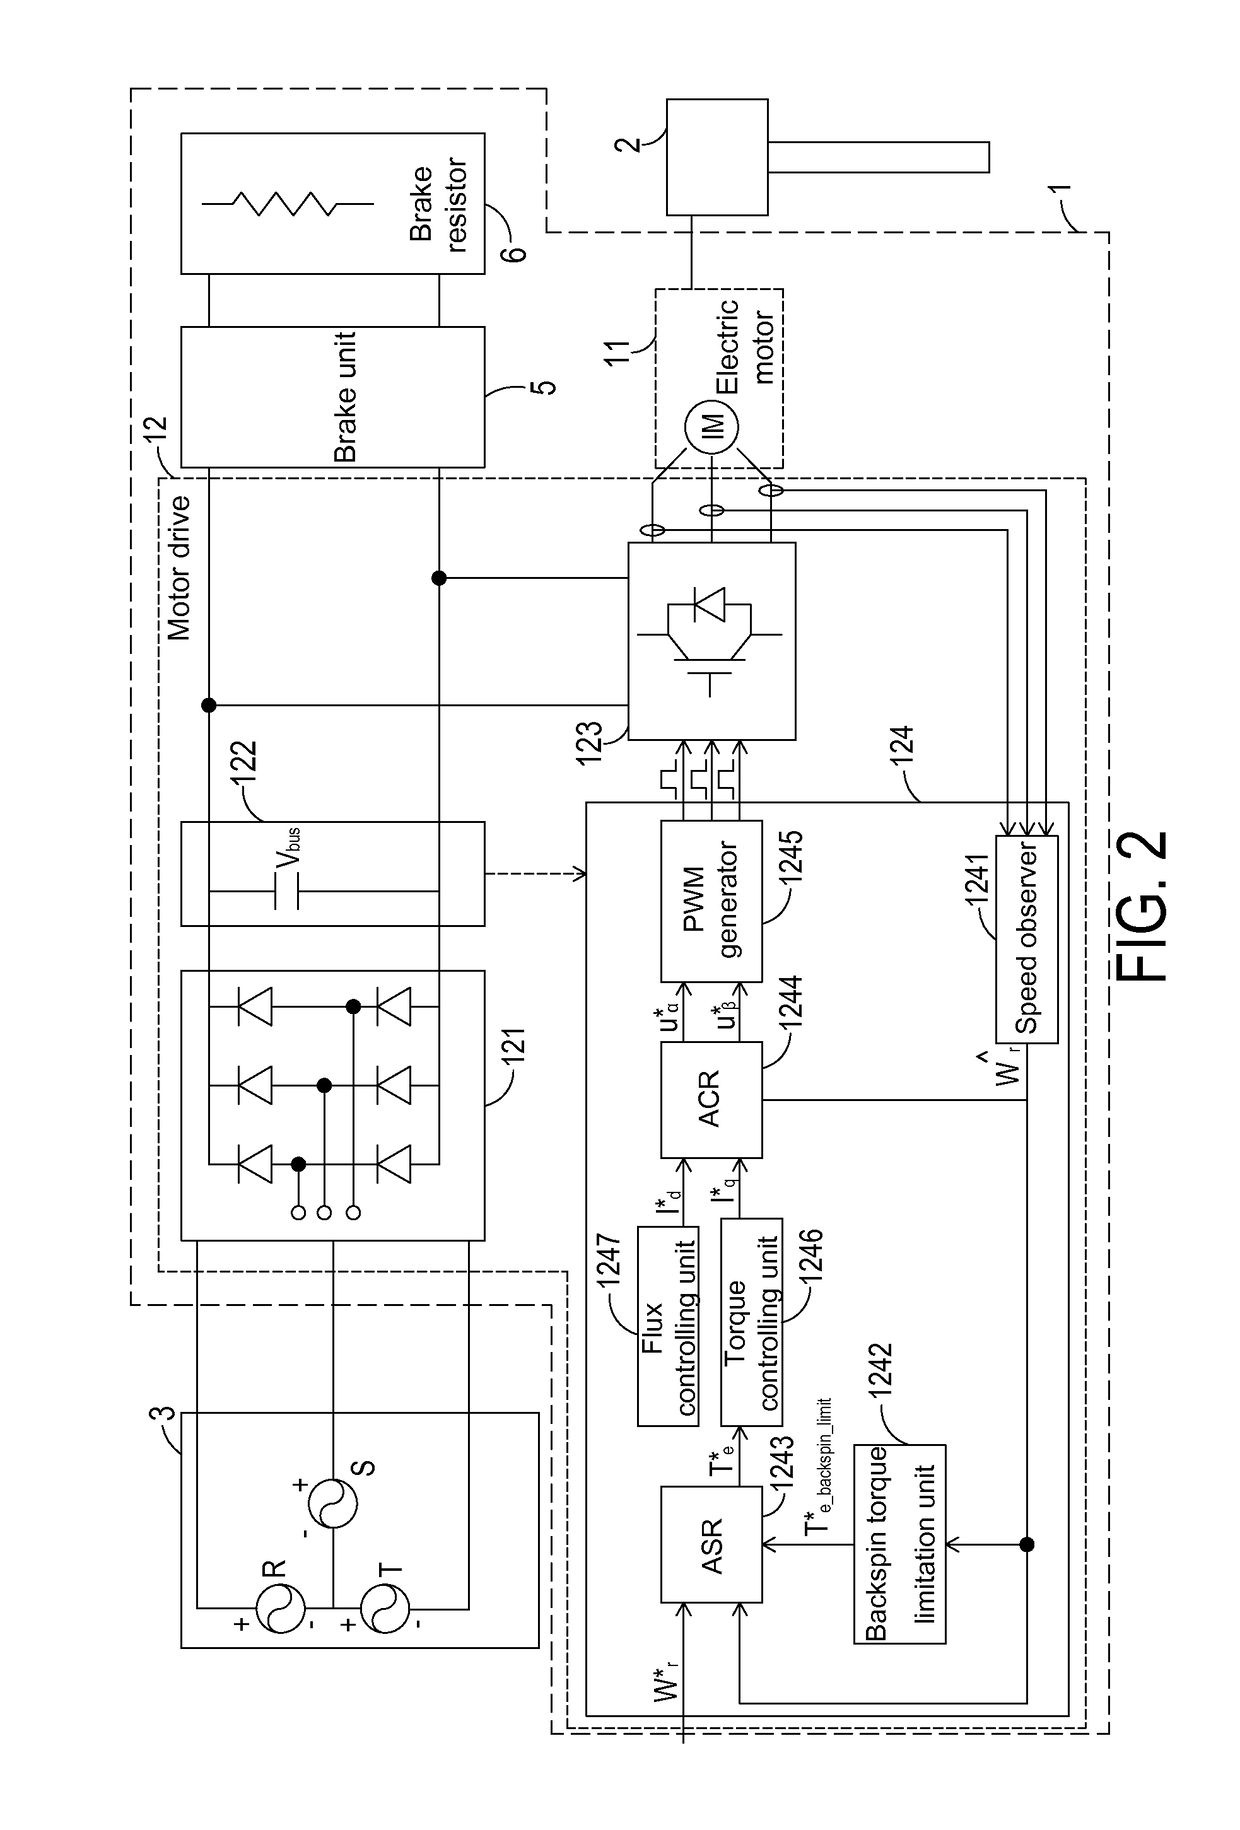 Control method and control system for screw pump